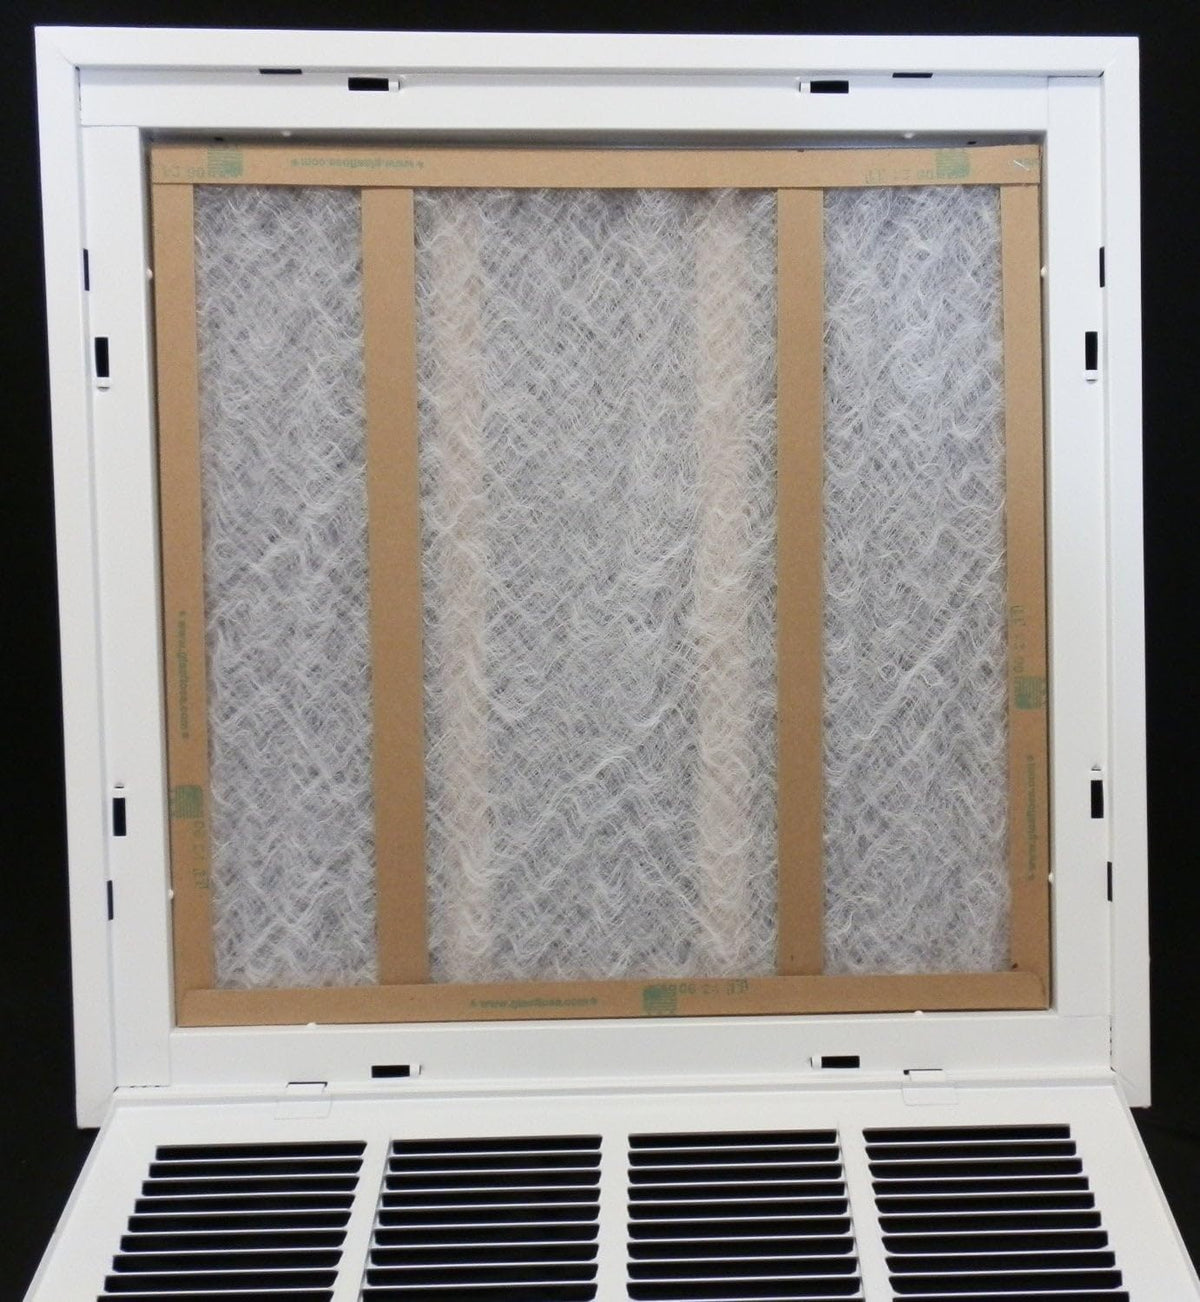 32&quot; X 25&quot; Steel Return Air Filter Grille for 1&quot; Filter - Removable Frame - [Outer Dimensions: 34 5/8&quot; X 27 5/8&quot;]